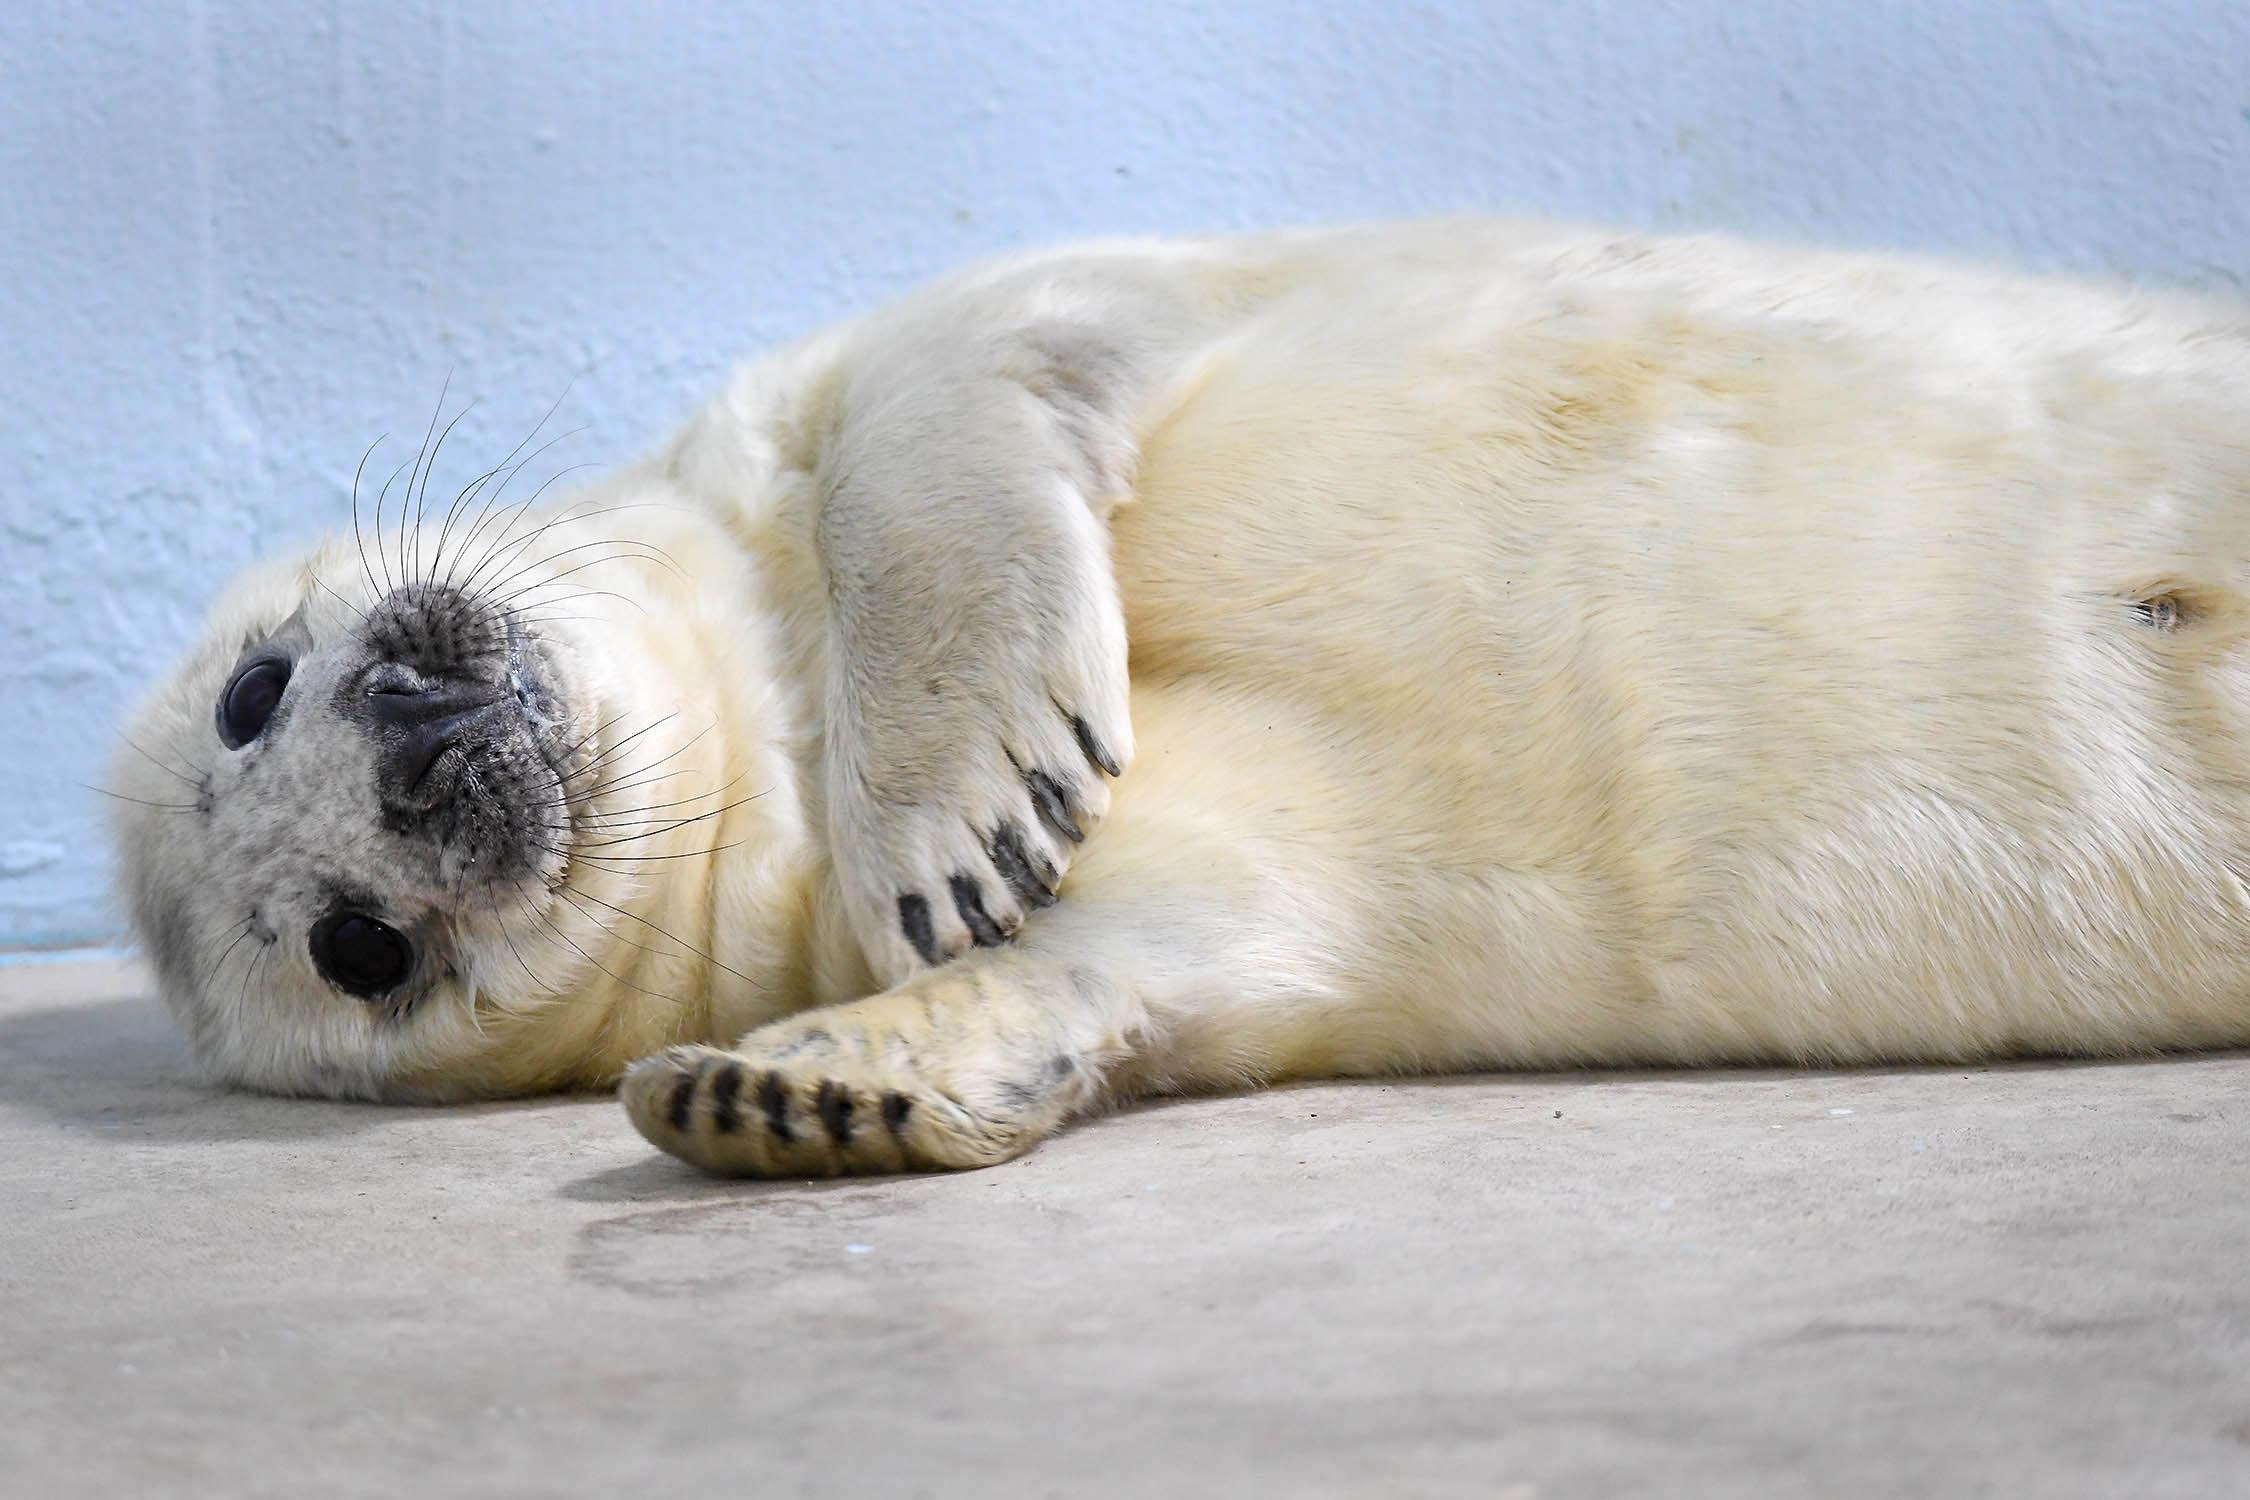 A male gray seal was born at Brookfield Zoo on Dec. 26. (Jim Schulz / Chicago Zoological Society)